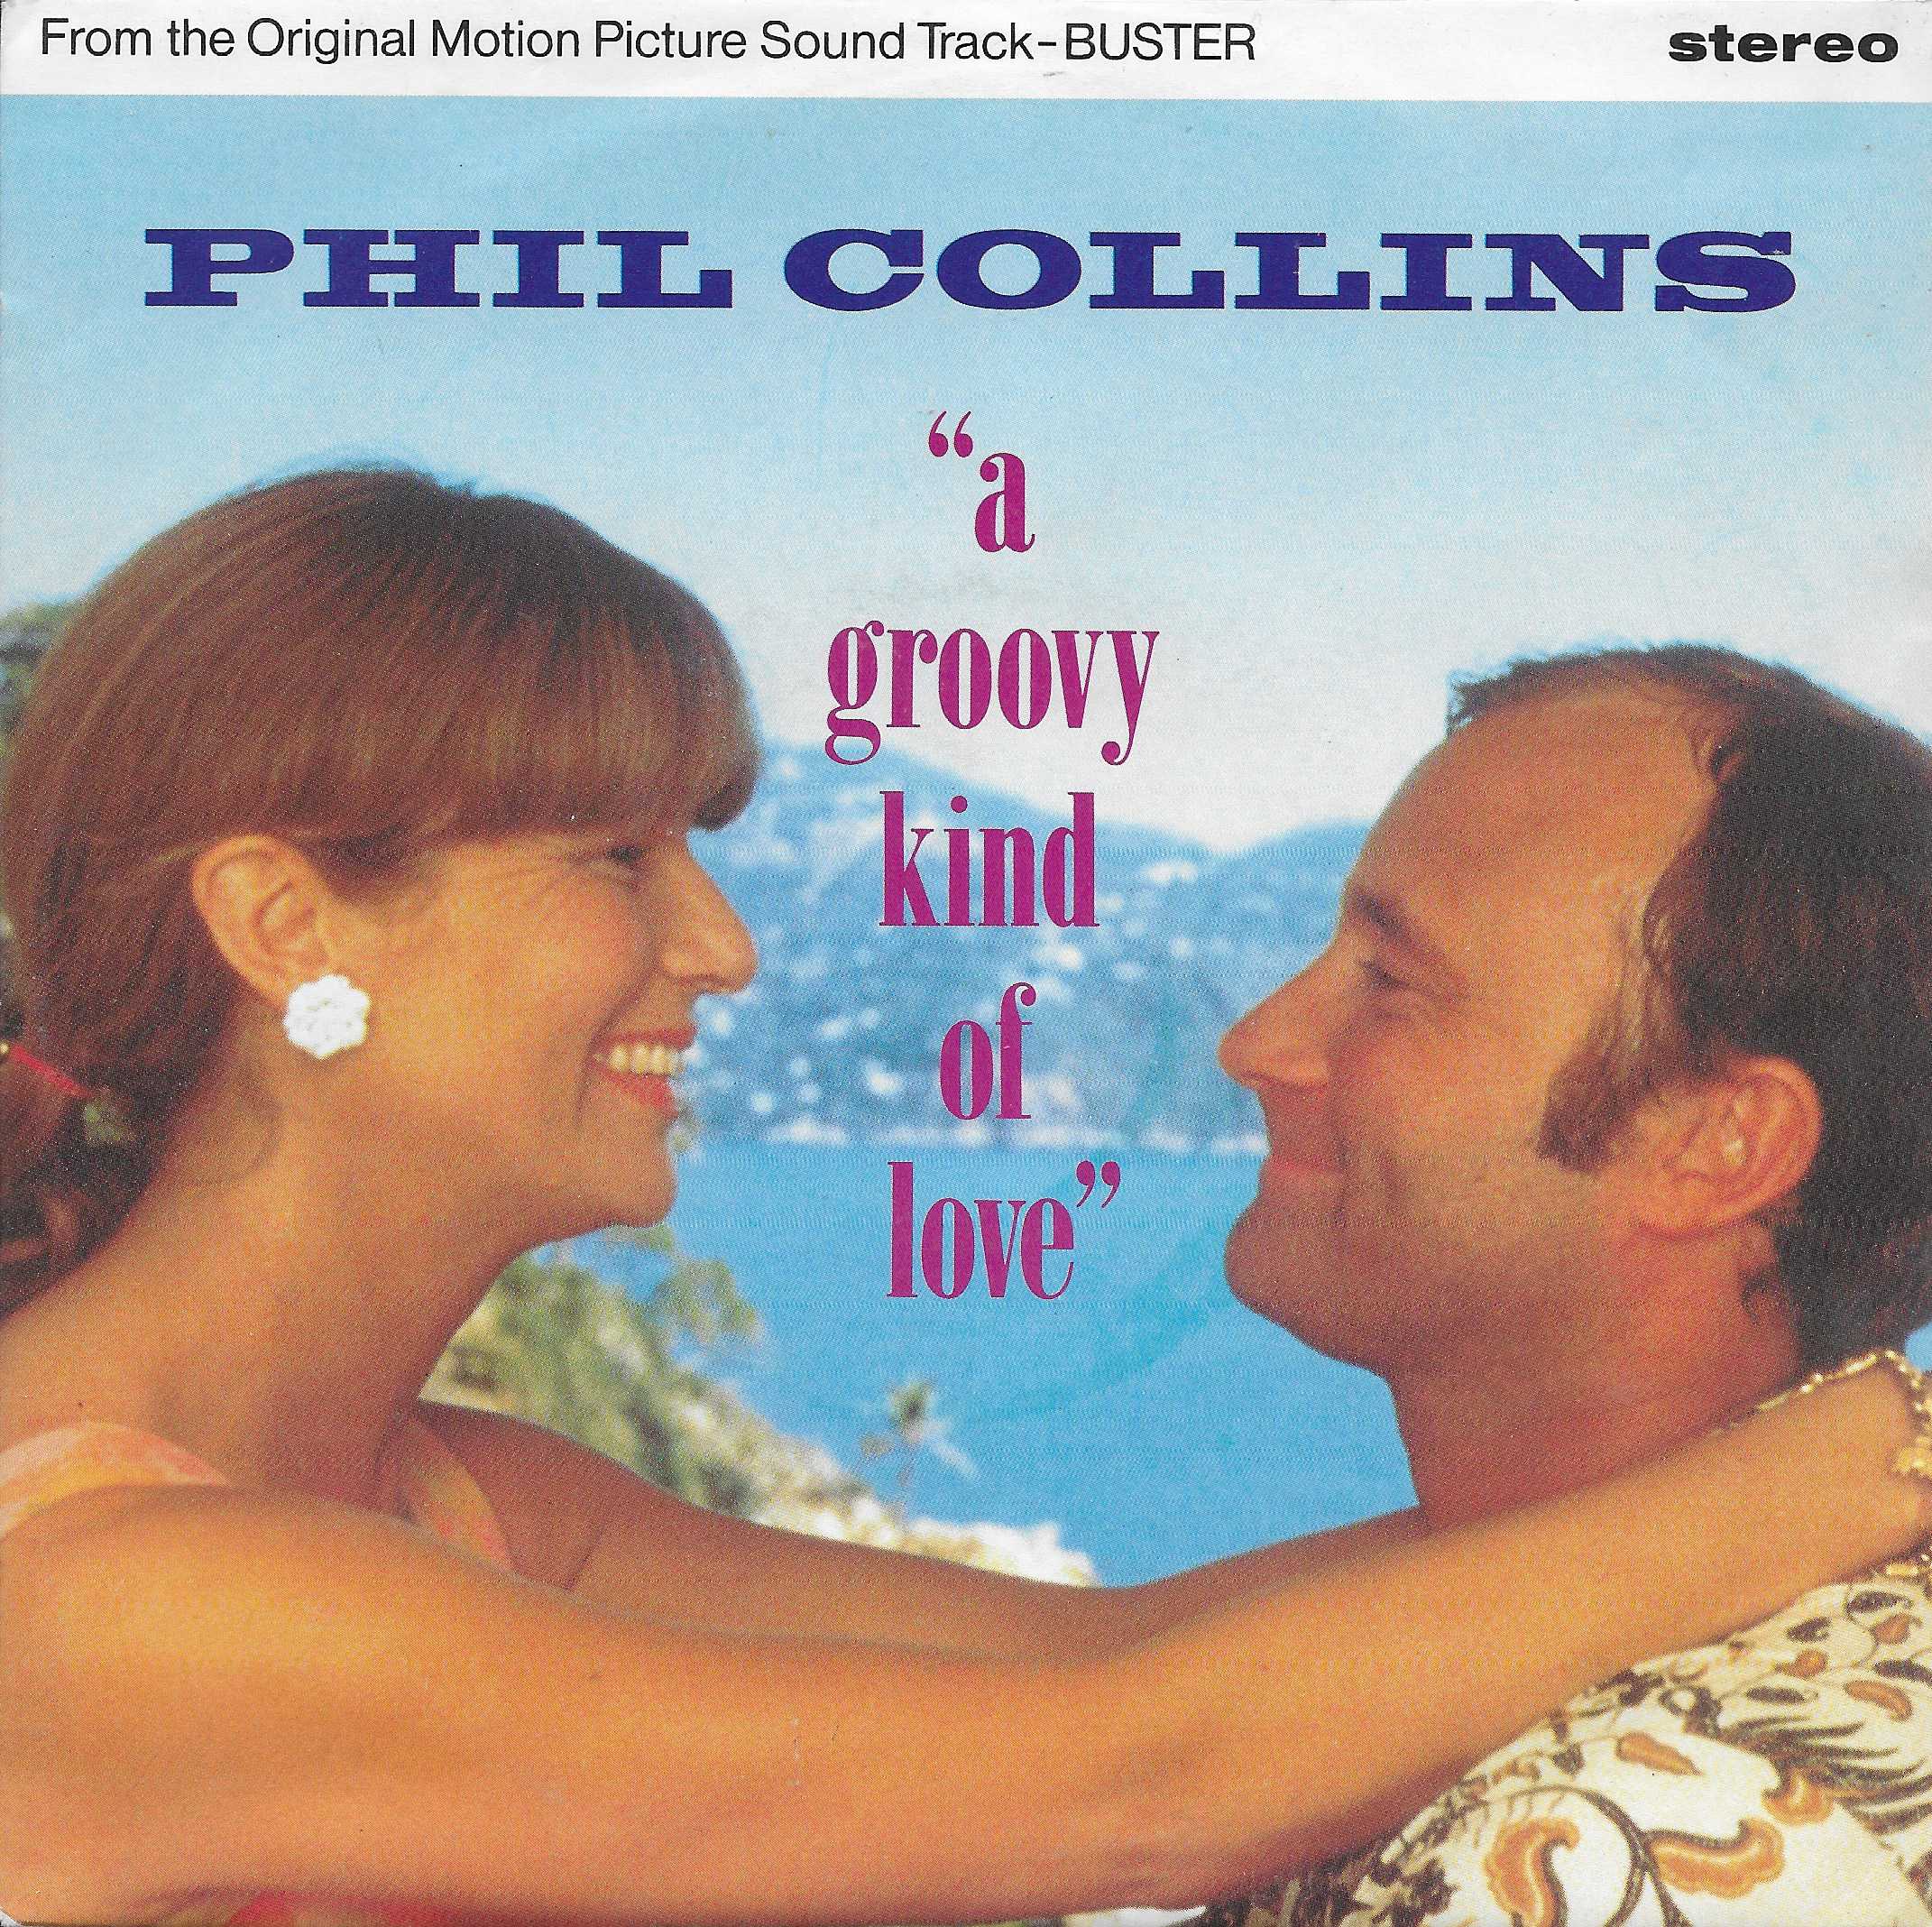 Picture of VS 1117 A groovy kind of love (Buster) by artist Tony Wine / Carole Bayer / Lamont Dozier / Phil Collins from ITV, Channel 4 and Channel 5 library